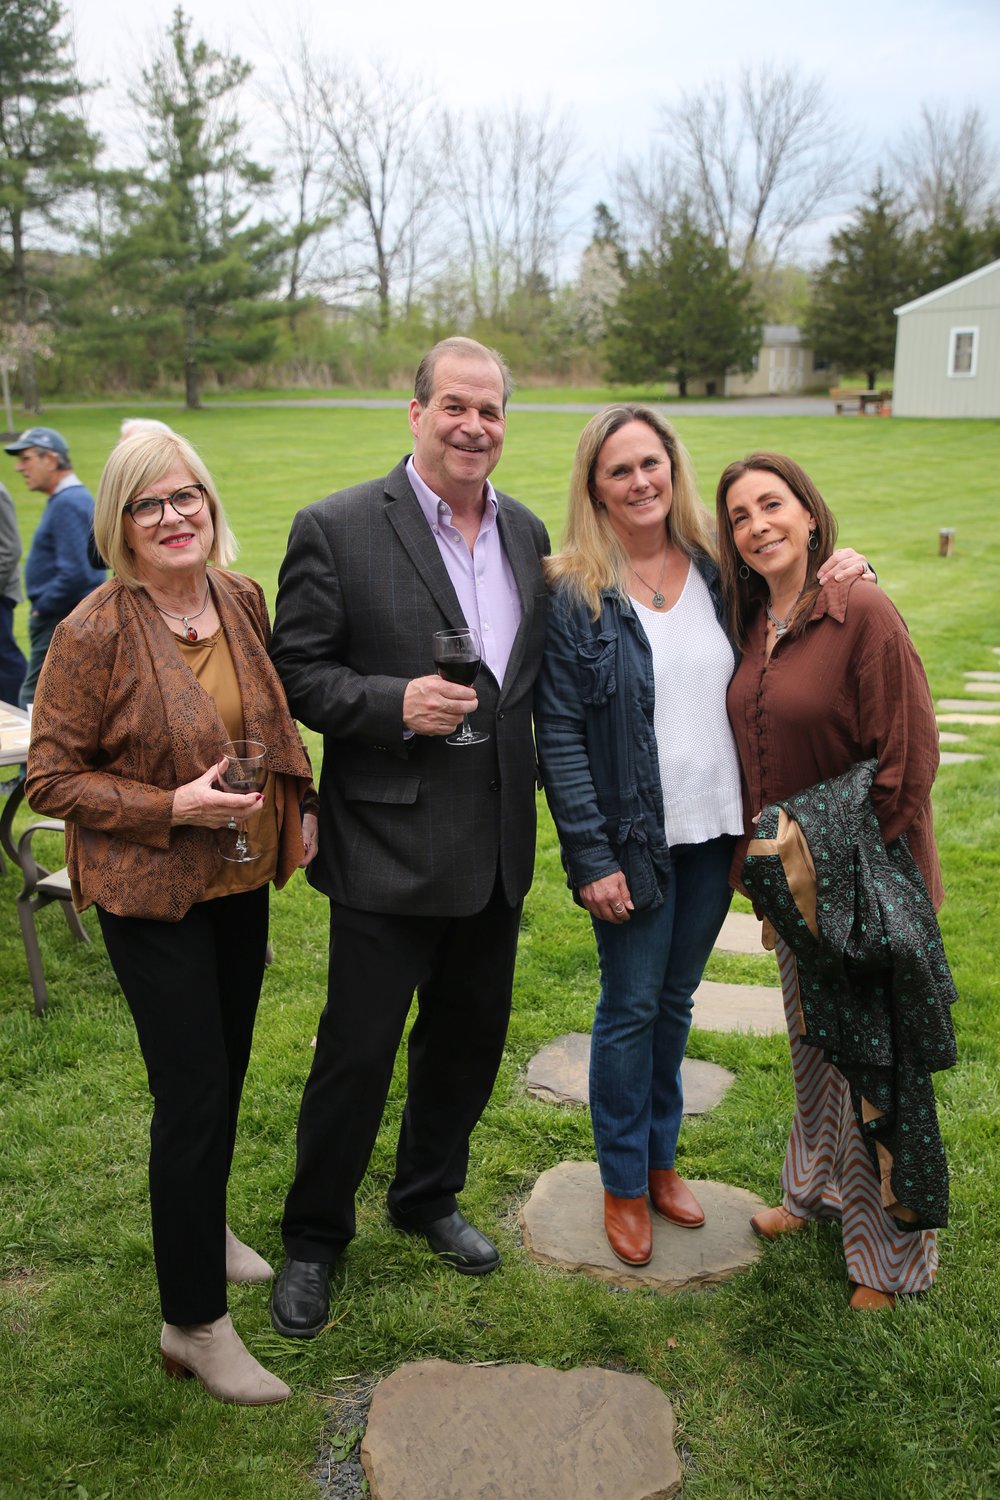 Anna-Lena Bromberg, Paul Gratz, Kirby Fredendall and Lisa Volpe.